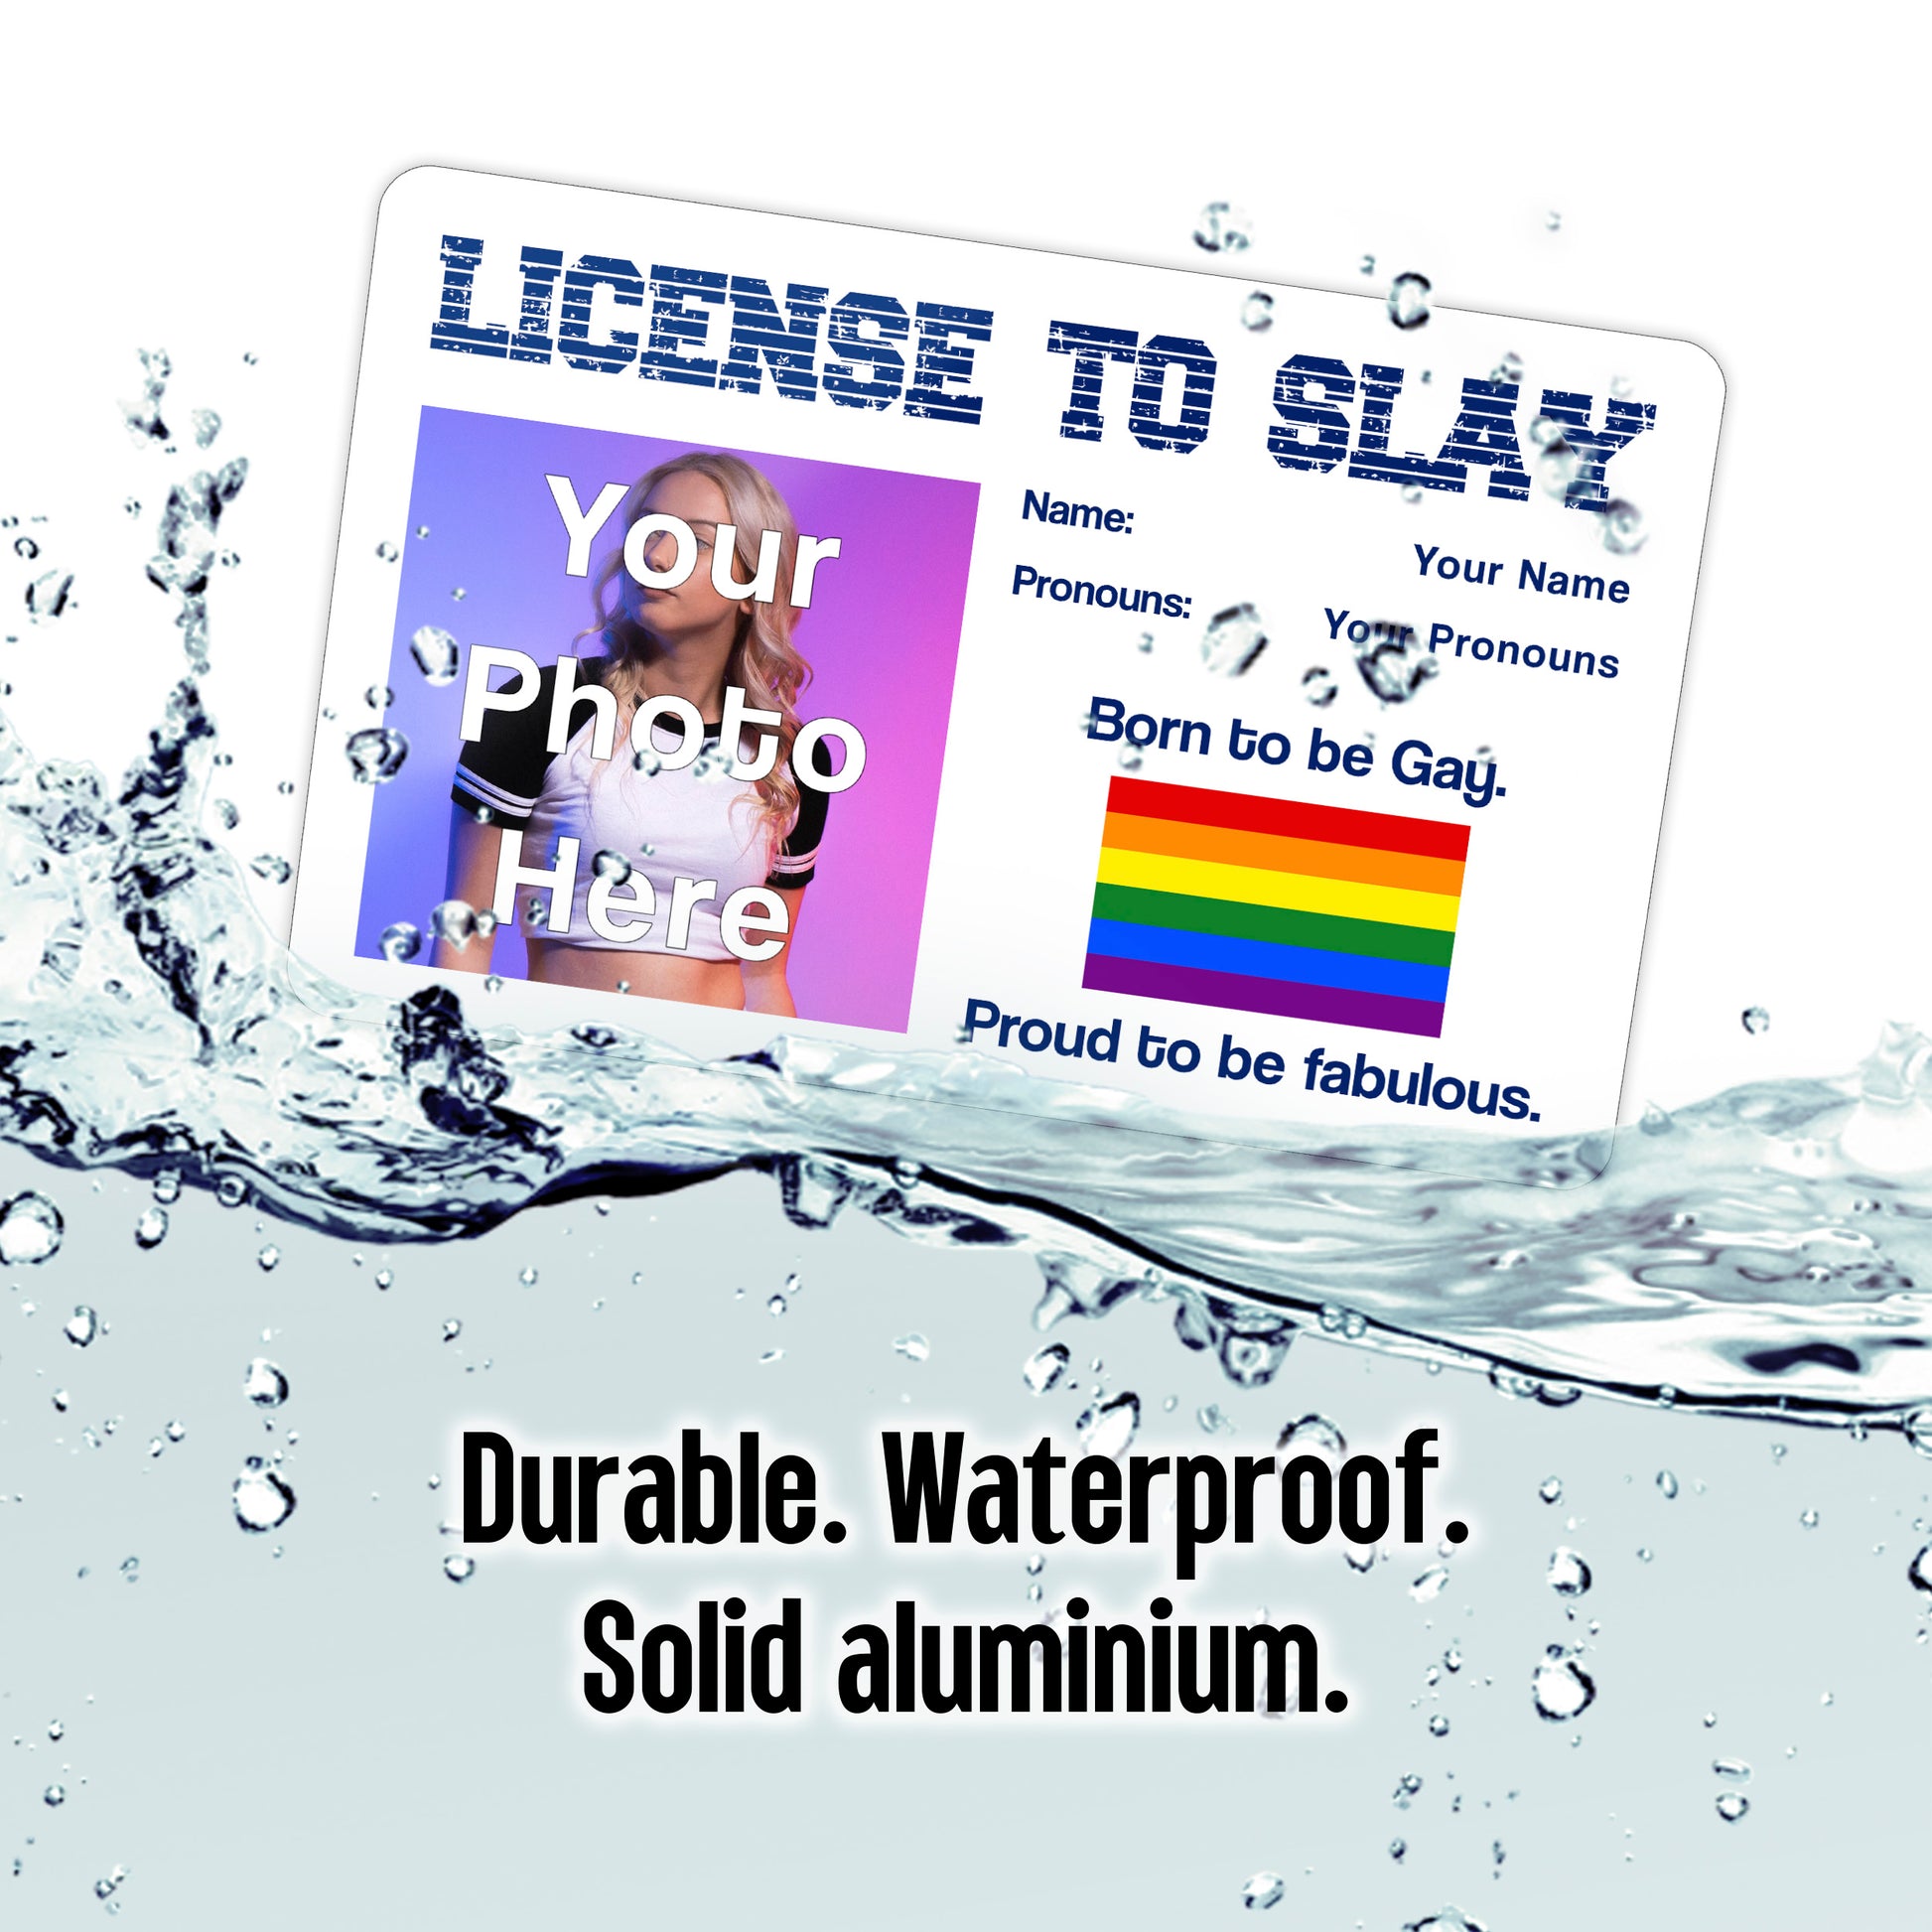 Aluminium novelty License To Slay wallet card personalised with your photo, name, pronouns, and the classic gay pride rainbow pride flag